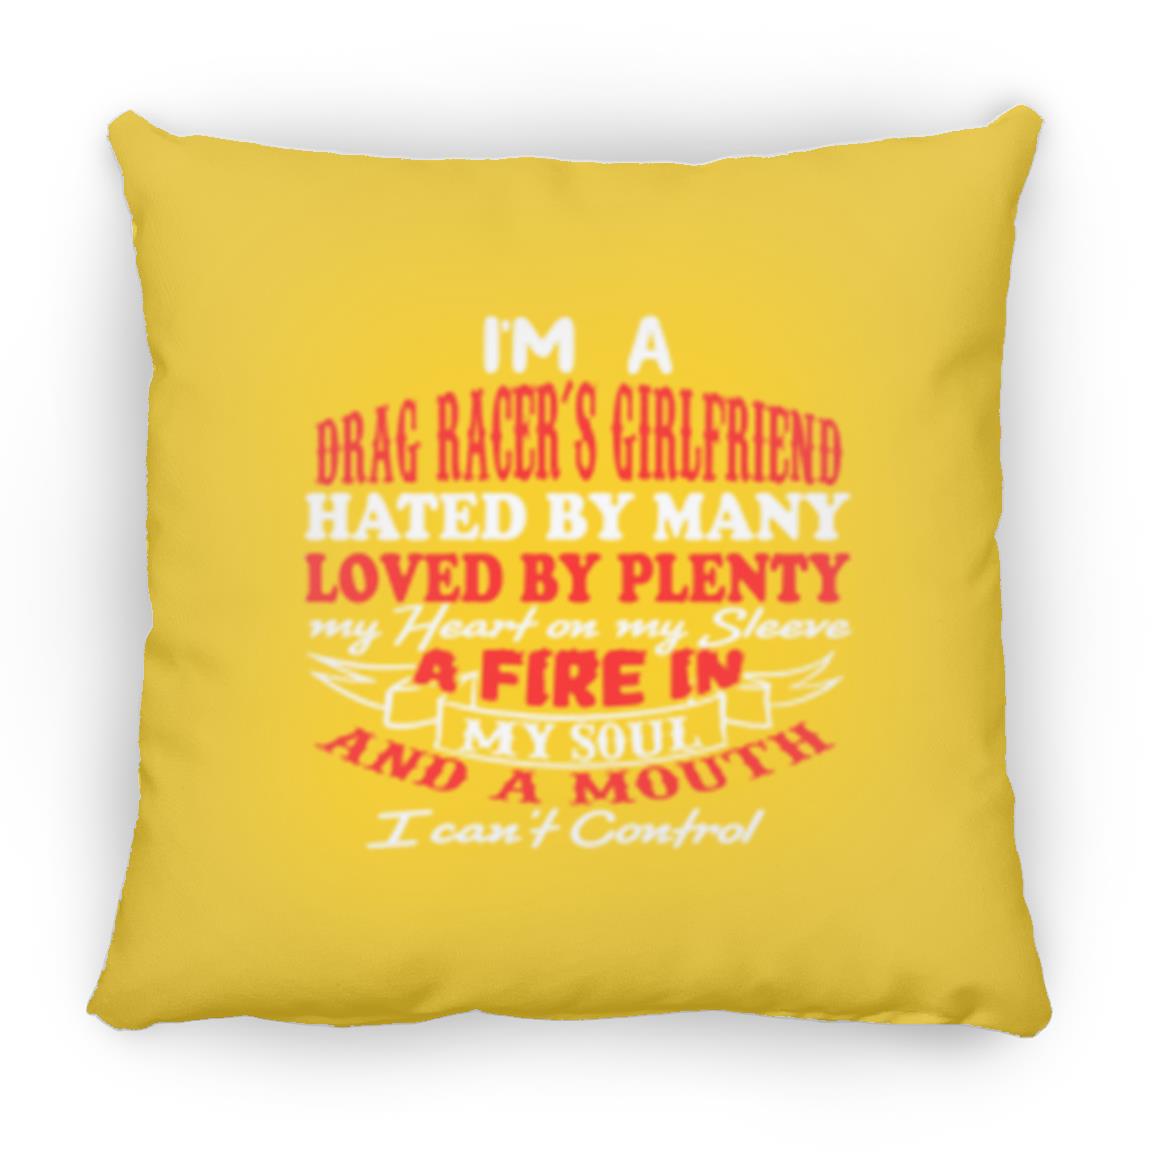 I'm A Drag Racer's Girlfriend Hated By Many Loved By Plenty Small Square Pillow